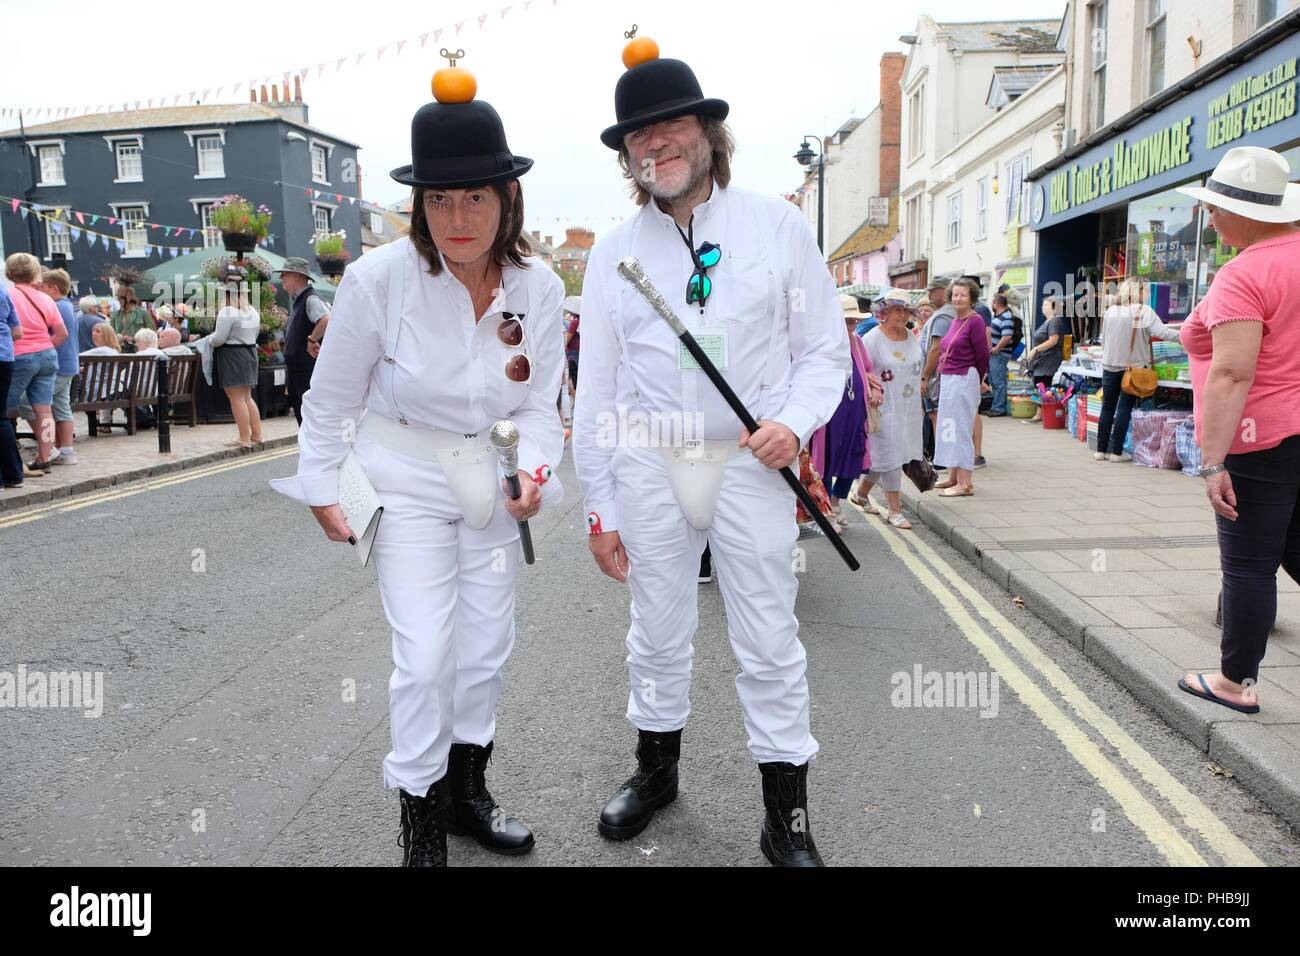 Bridport Hat Festival, Hat, Bridport, Dorset, UK. 1st September 2018.   Hat wearers gather and promenade in Bridport. The annual Bridport Hat Festival encourages residents and visitors to take part in hat related activities and and competitions including best hats, best hatted dog, and best hatted couple and most elegant ensemble. Credit:  Tom Corban/Alamy Live News Stock Photo